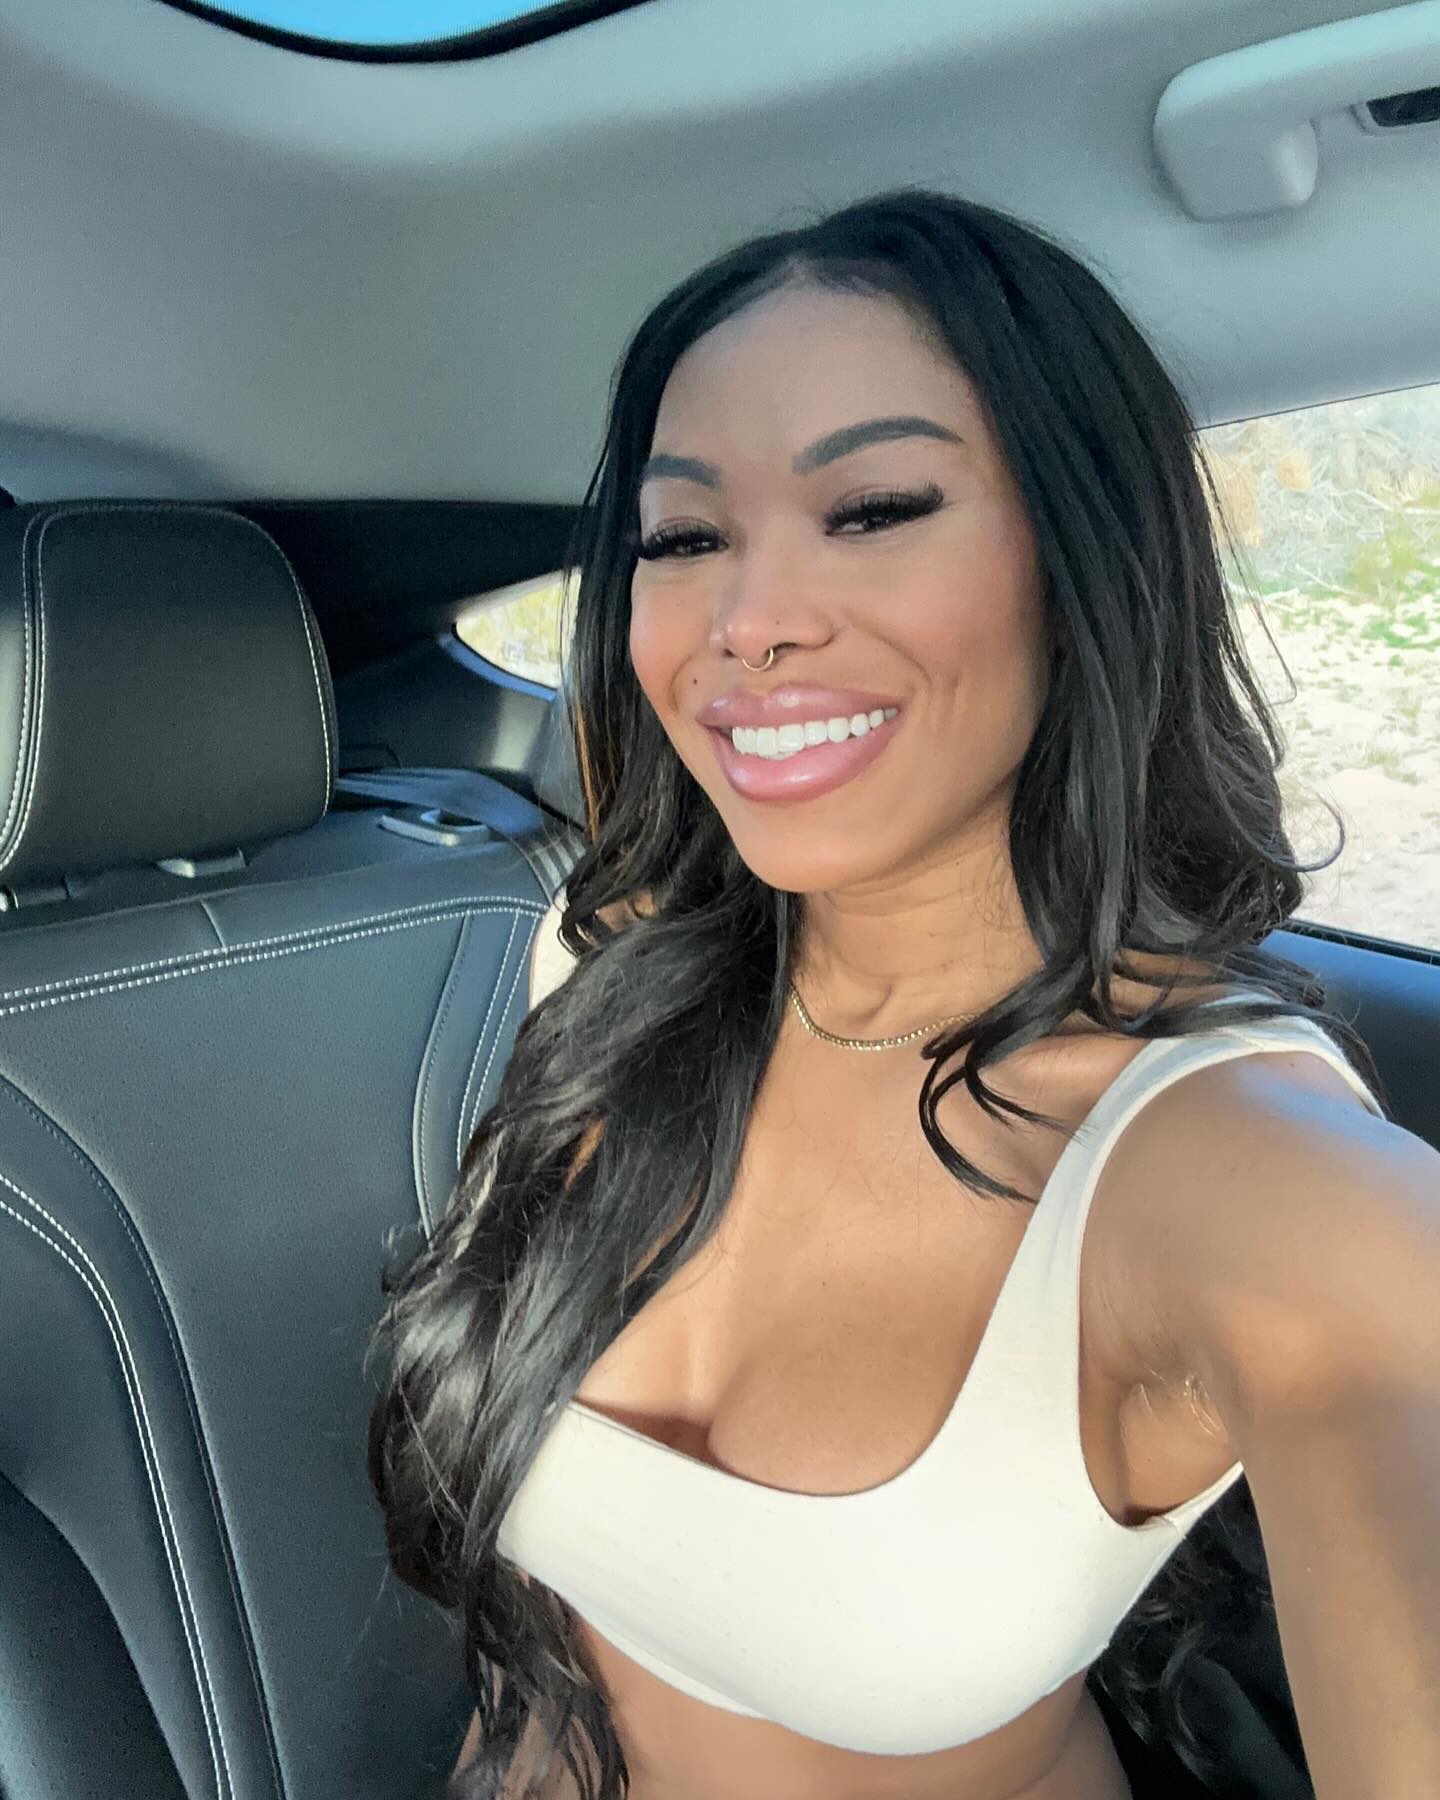 🤳 What’s your favorite spring time activities?